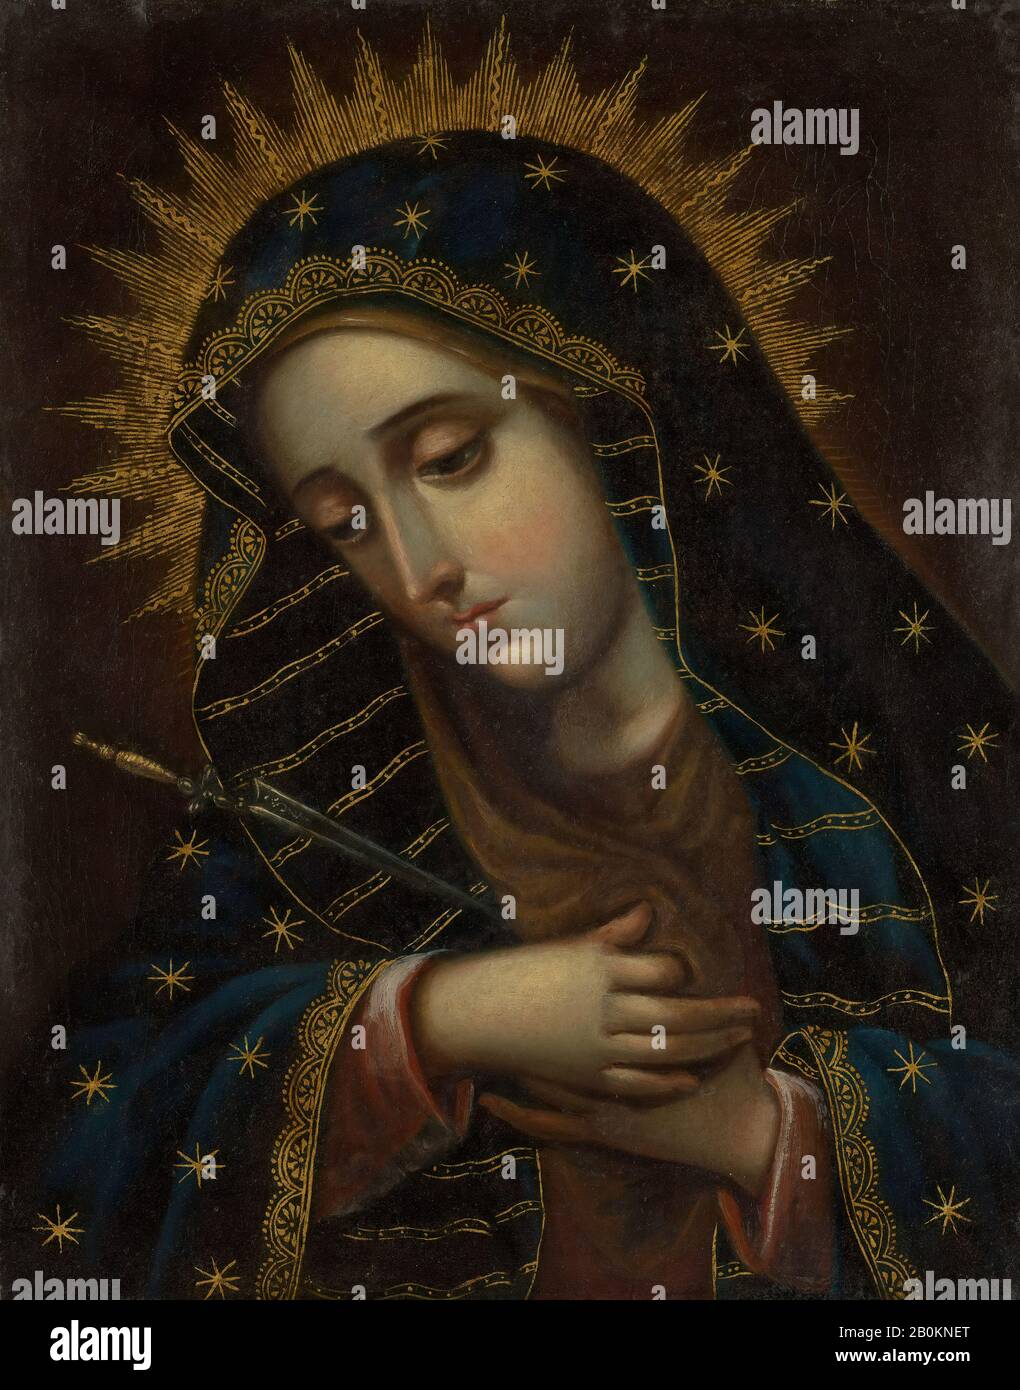 The Virgin of Sorrows, Spanish Colonial, 18th century, Possibly made in Mexico, Spanish Colonial, Oil on canvas, Overall: 10 3/4 x 8 1/2 in. (27.3 x 21.6 cm), Paintings Stock Photo